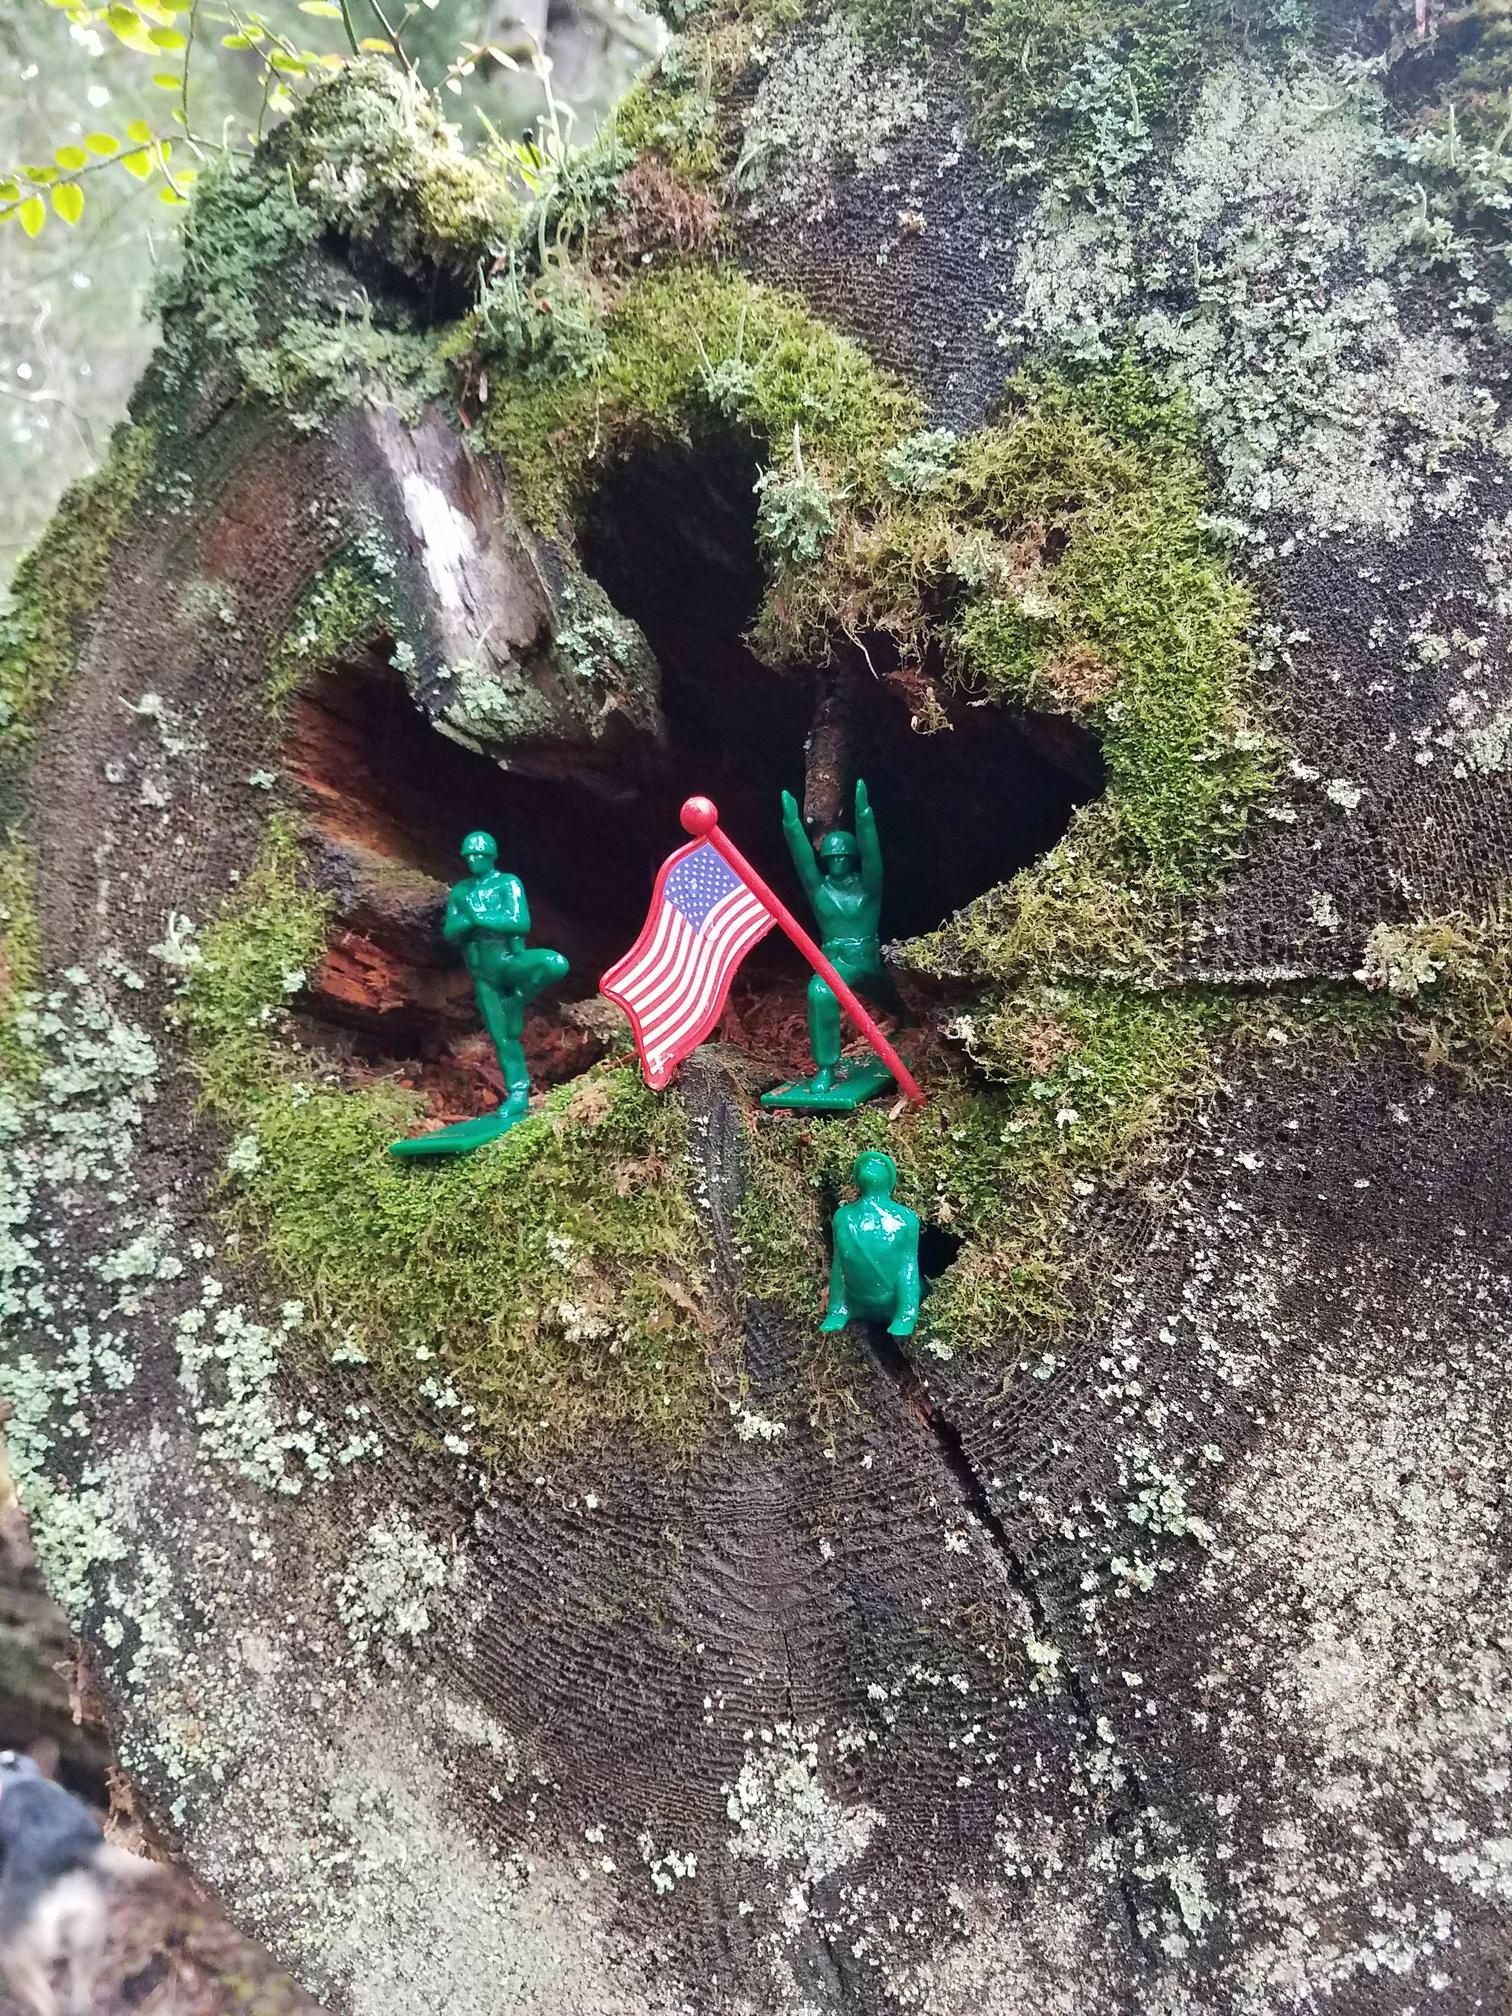 I found green army men doing Yoga in the middle of the woods while hiking.